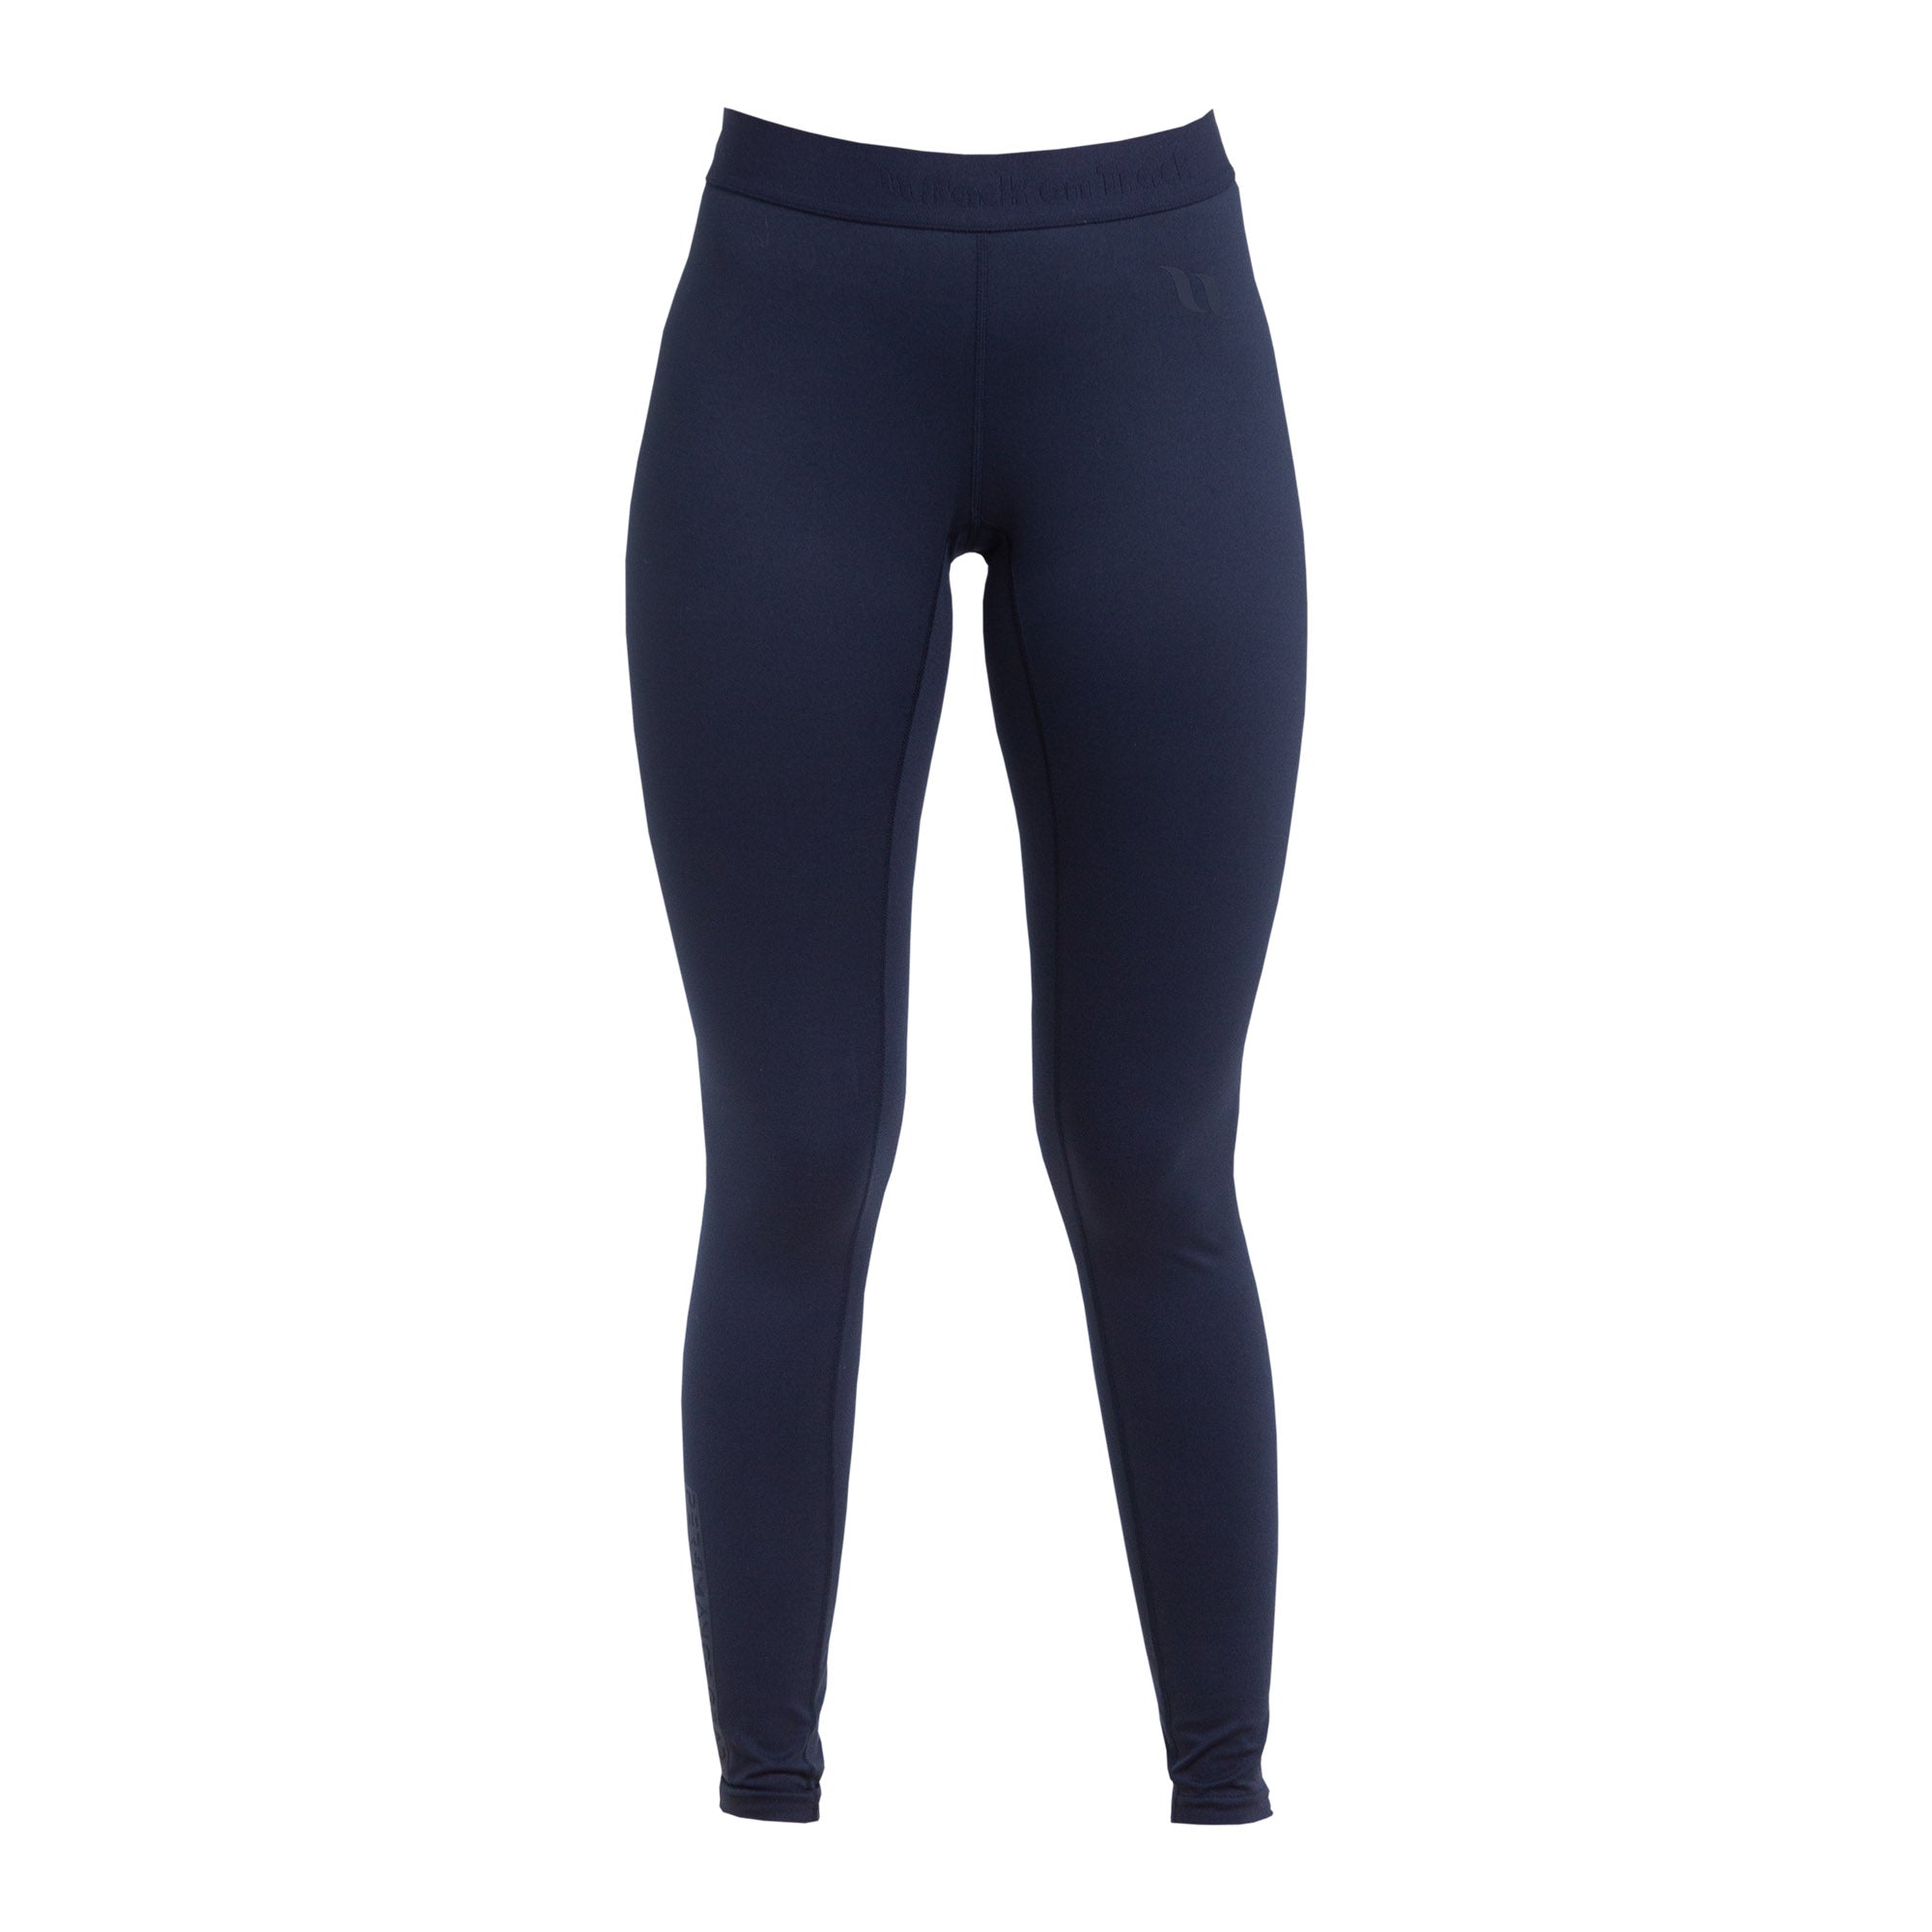 CAICJ98 Womens Leggings For Working Out Women's Lined Leggings